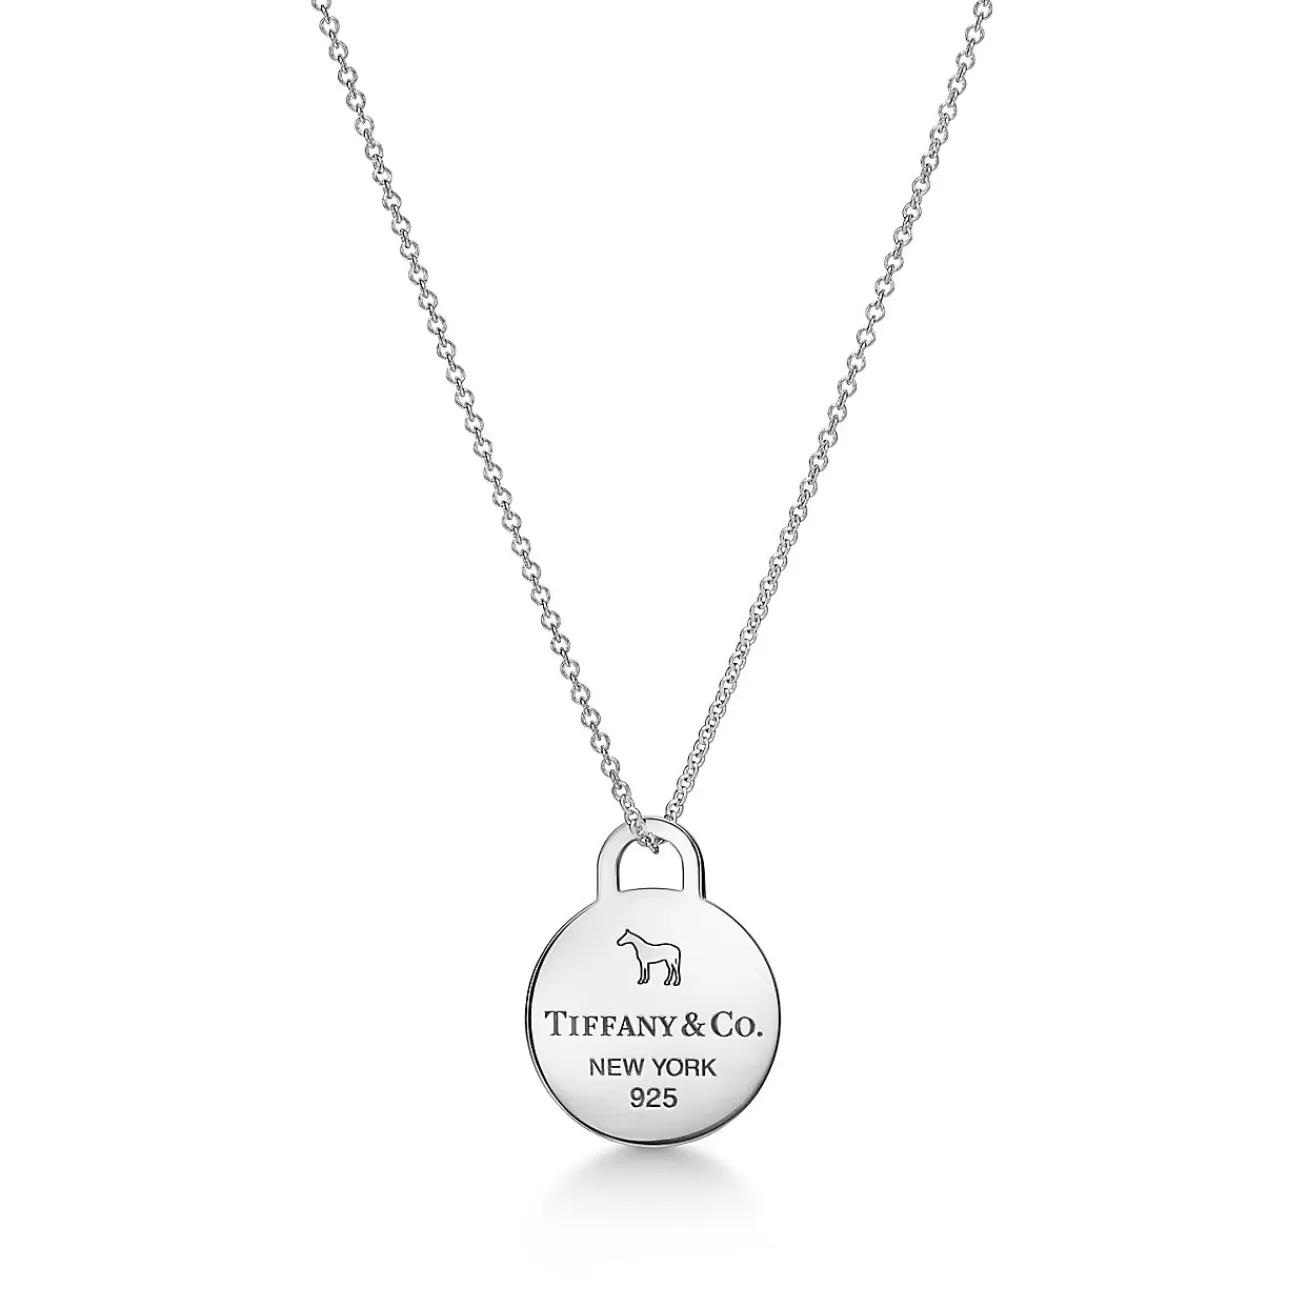 Tiffany & Co. The Return to Tiffany® x Beyoncé Collection Round Tag Pendant in Sterling Silver | ^ Necklaces & Pendants | Sterling Silver Jewelry